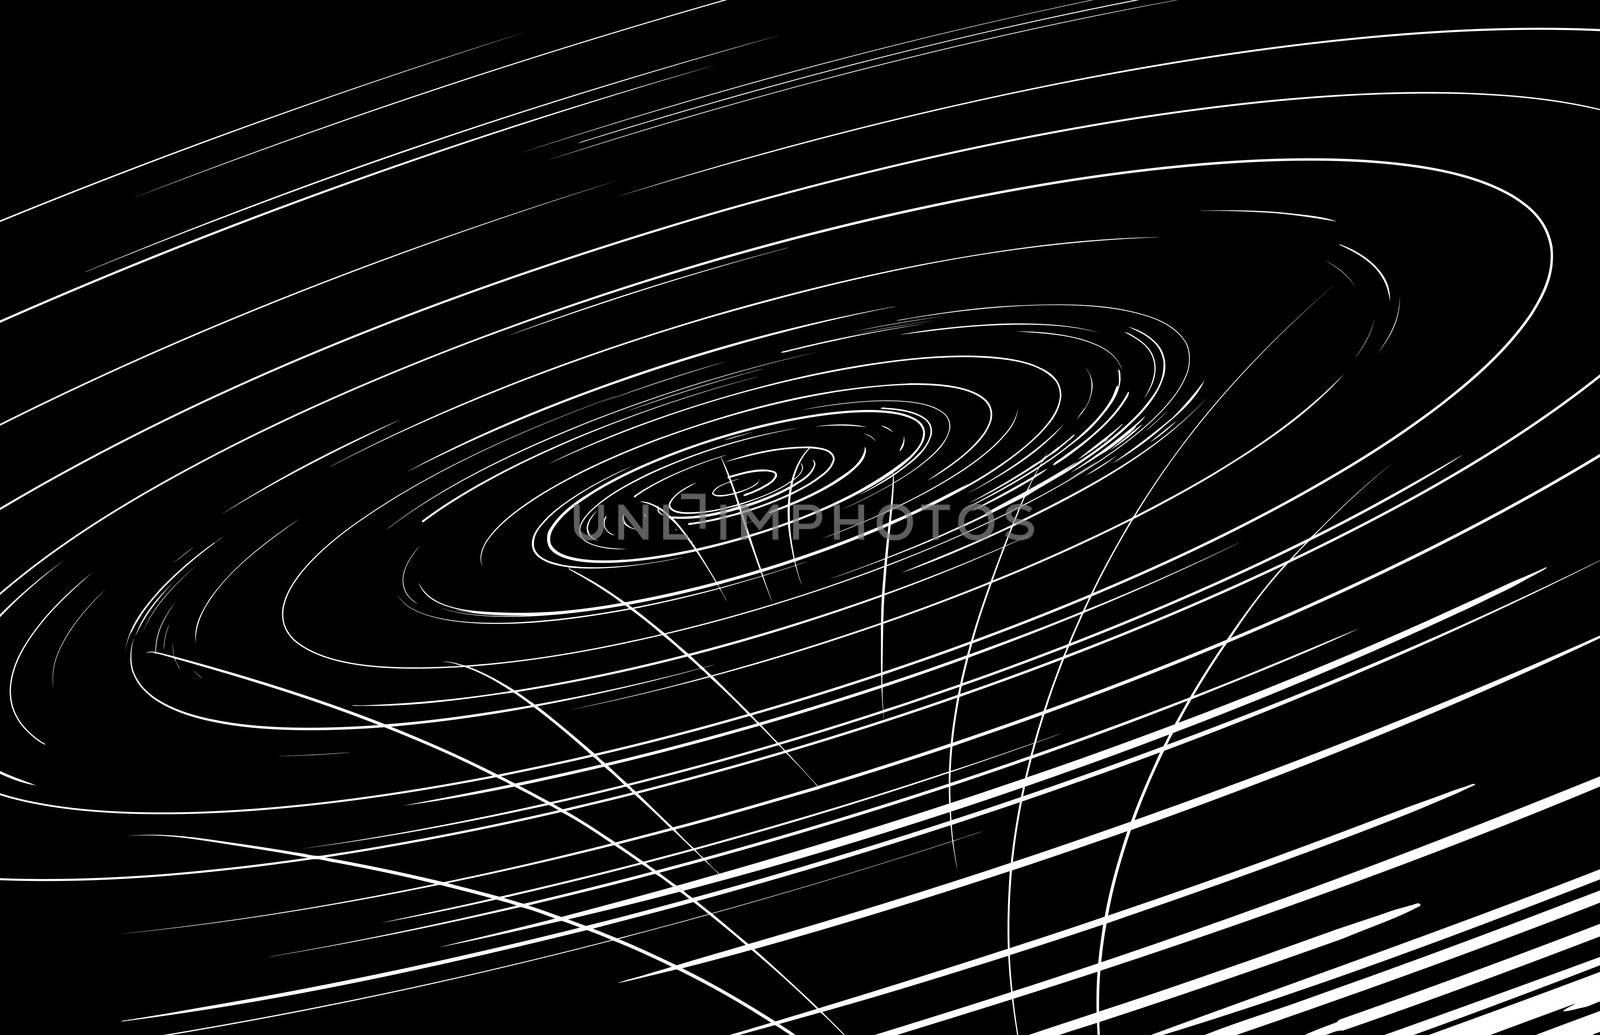 Background illustration of white and black vortex or cosmic funnel